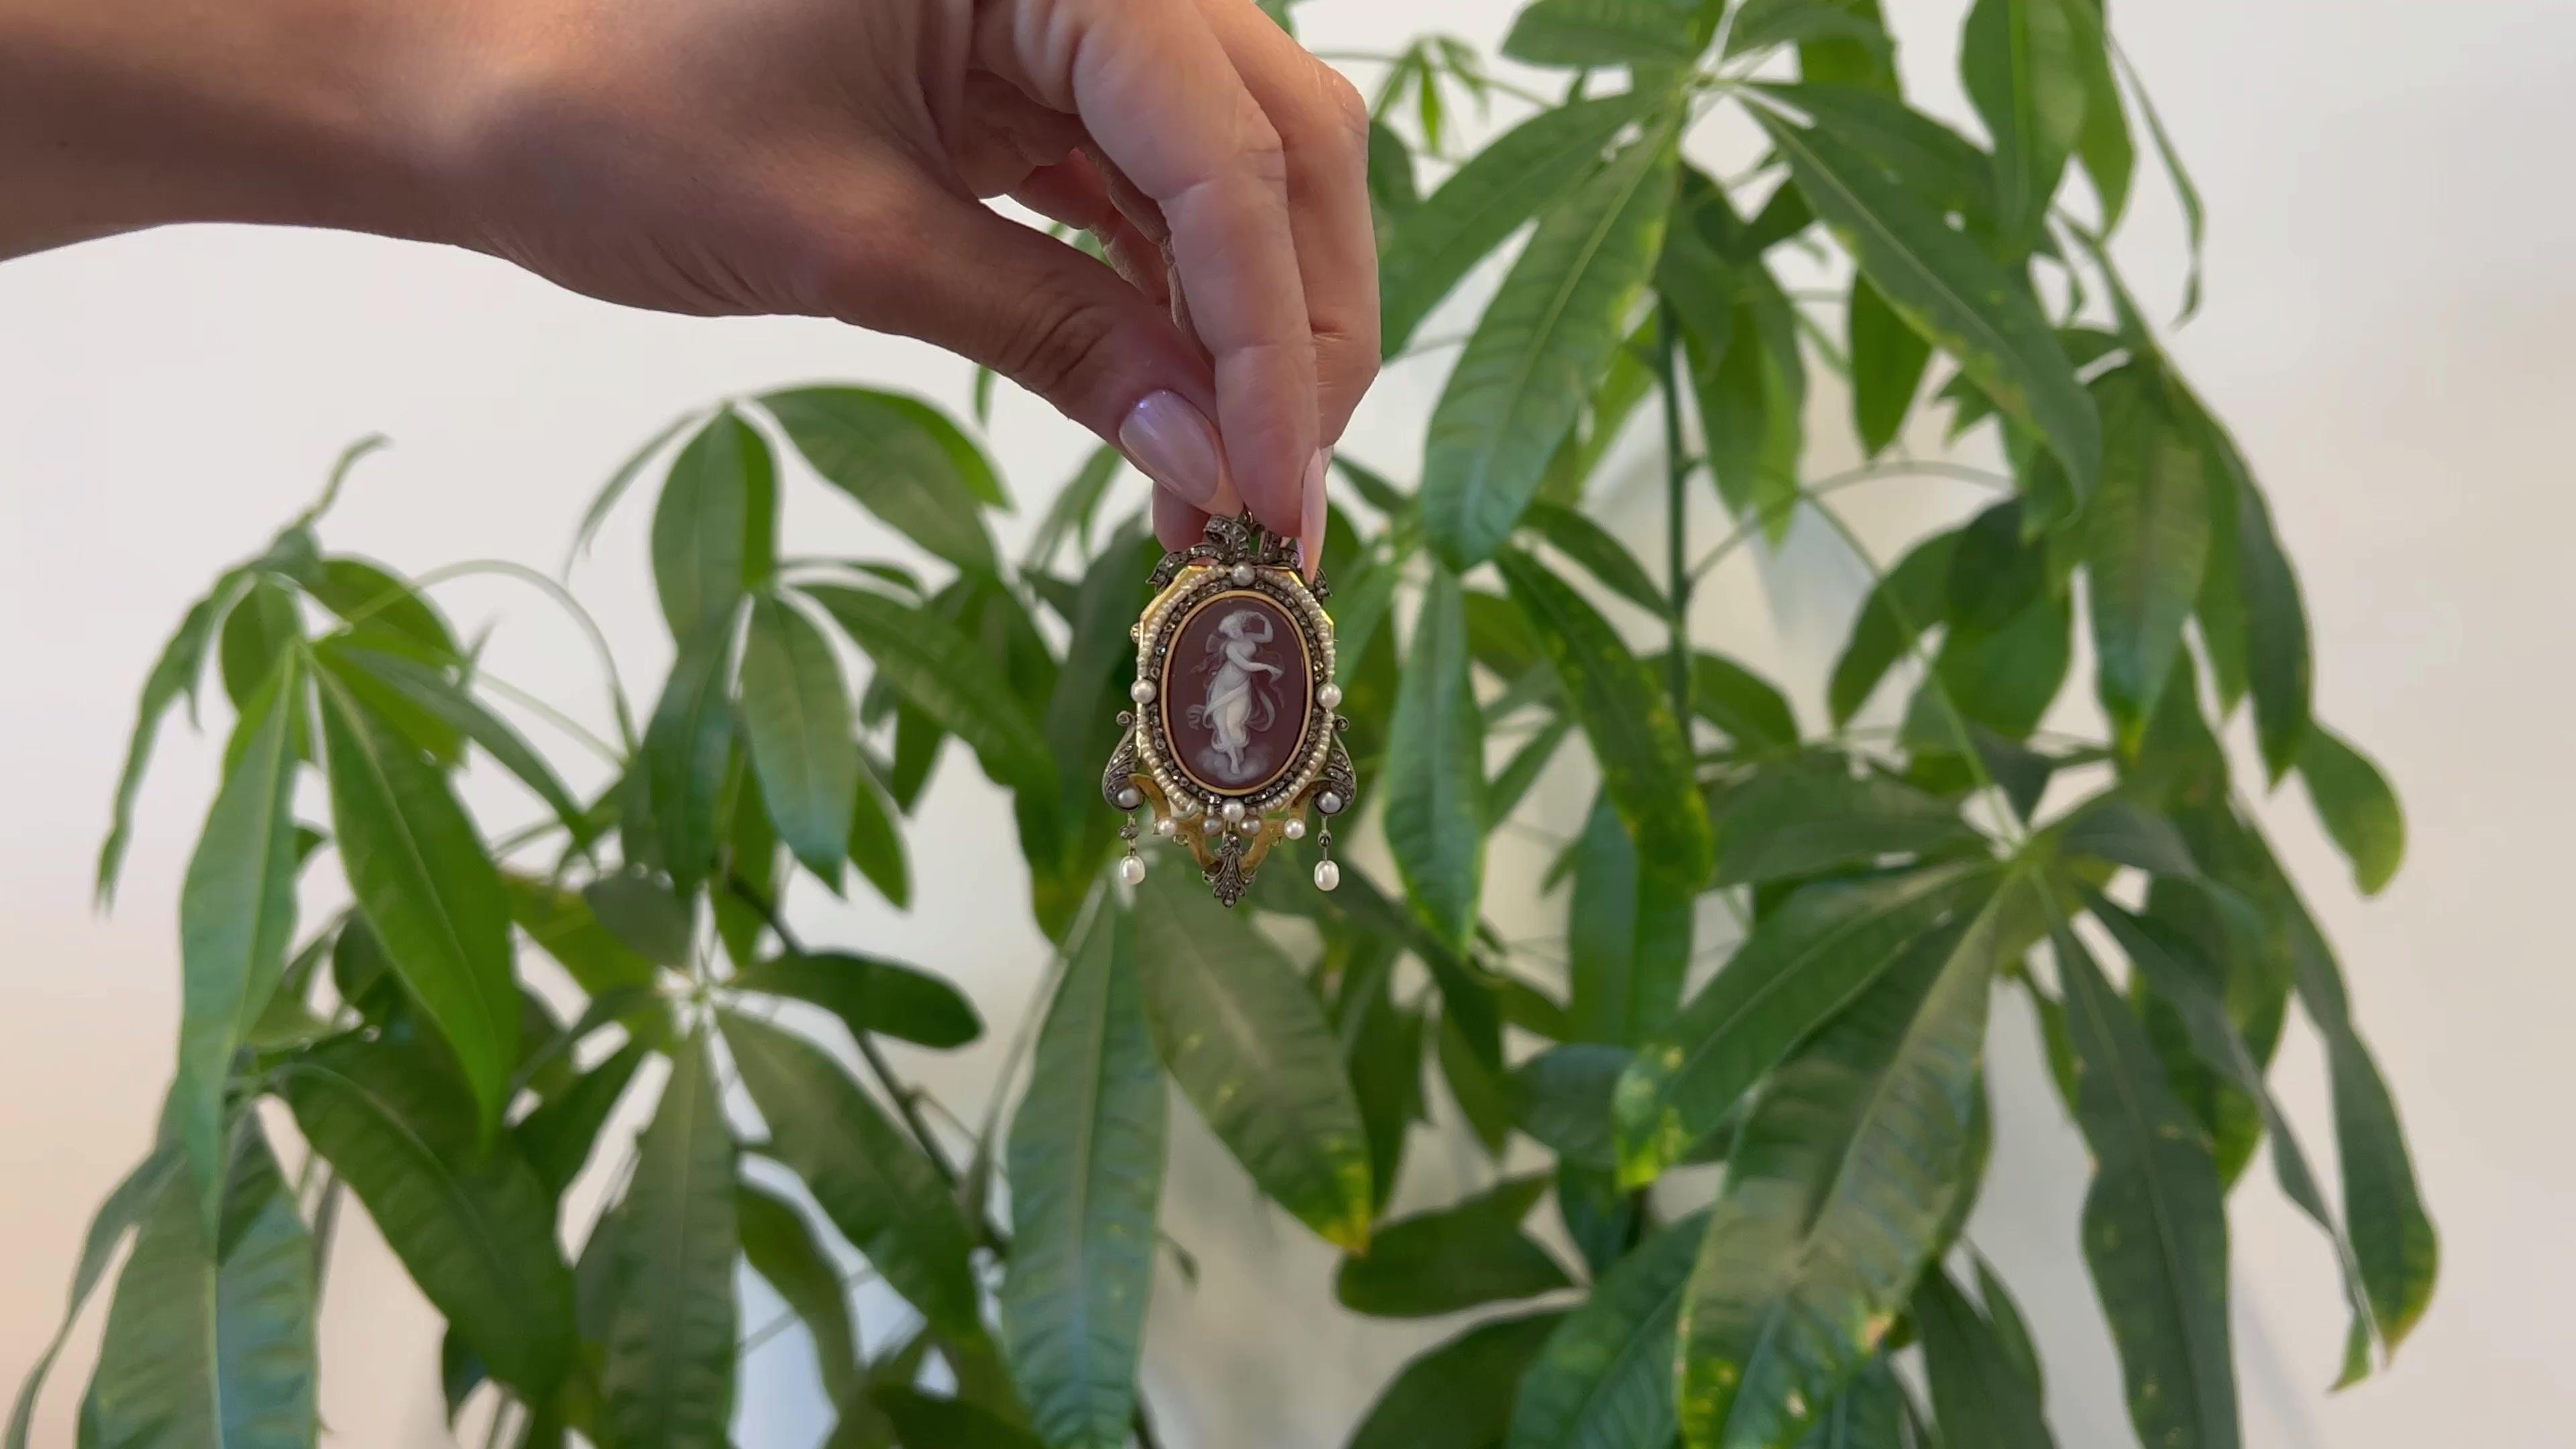 One Neo Classic French Carved Agate Psyche Cameo 18k Yellow Gold Silver Locket Pendant. Featuring one carved carnelian agate cameo that represents the Greek-Roman mythological scene of Psyche frolicking. Accented by 106 rose and senaille cut